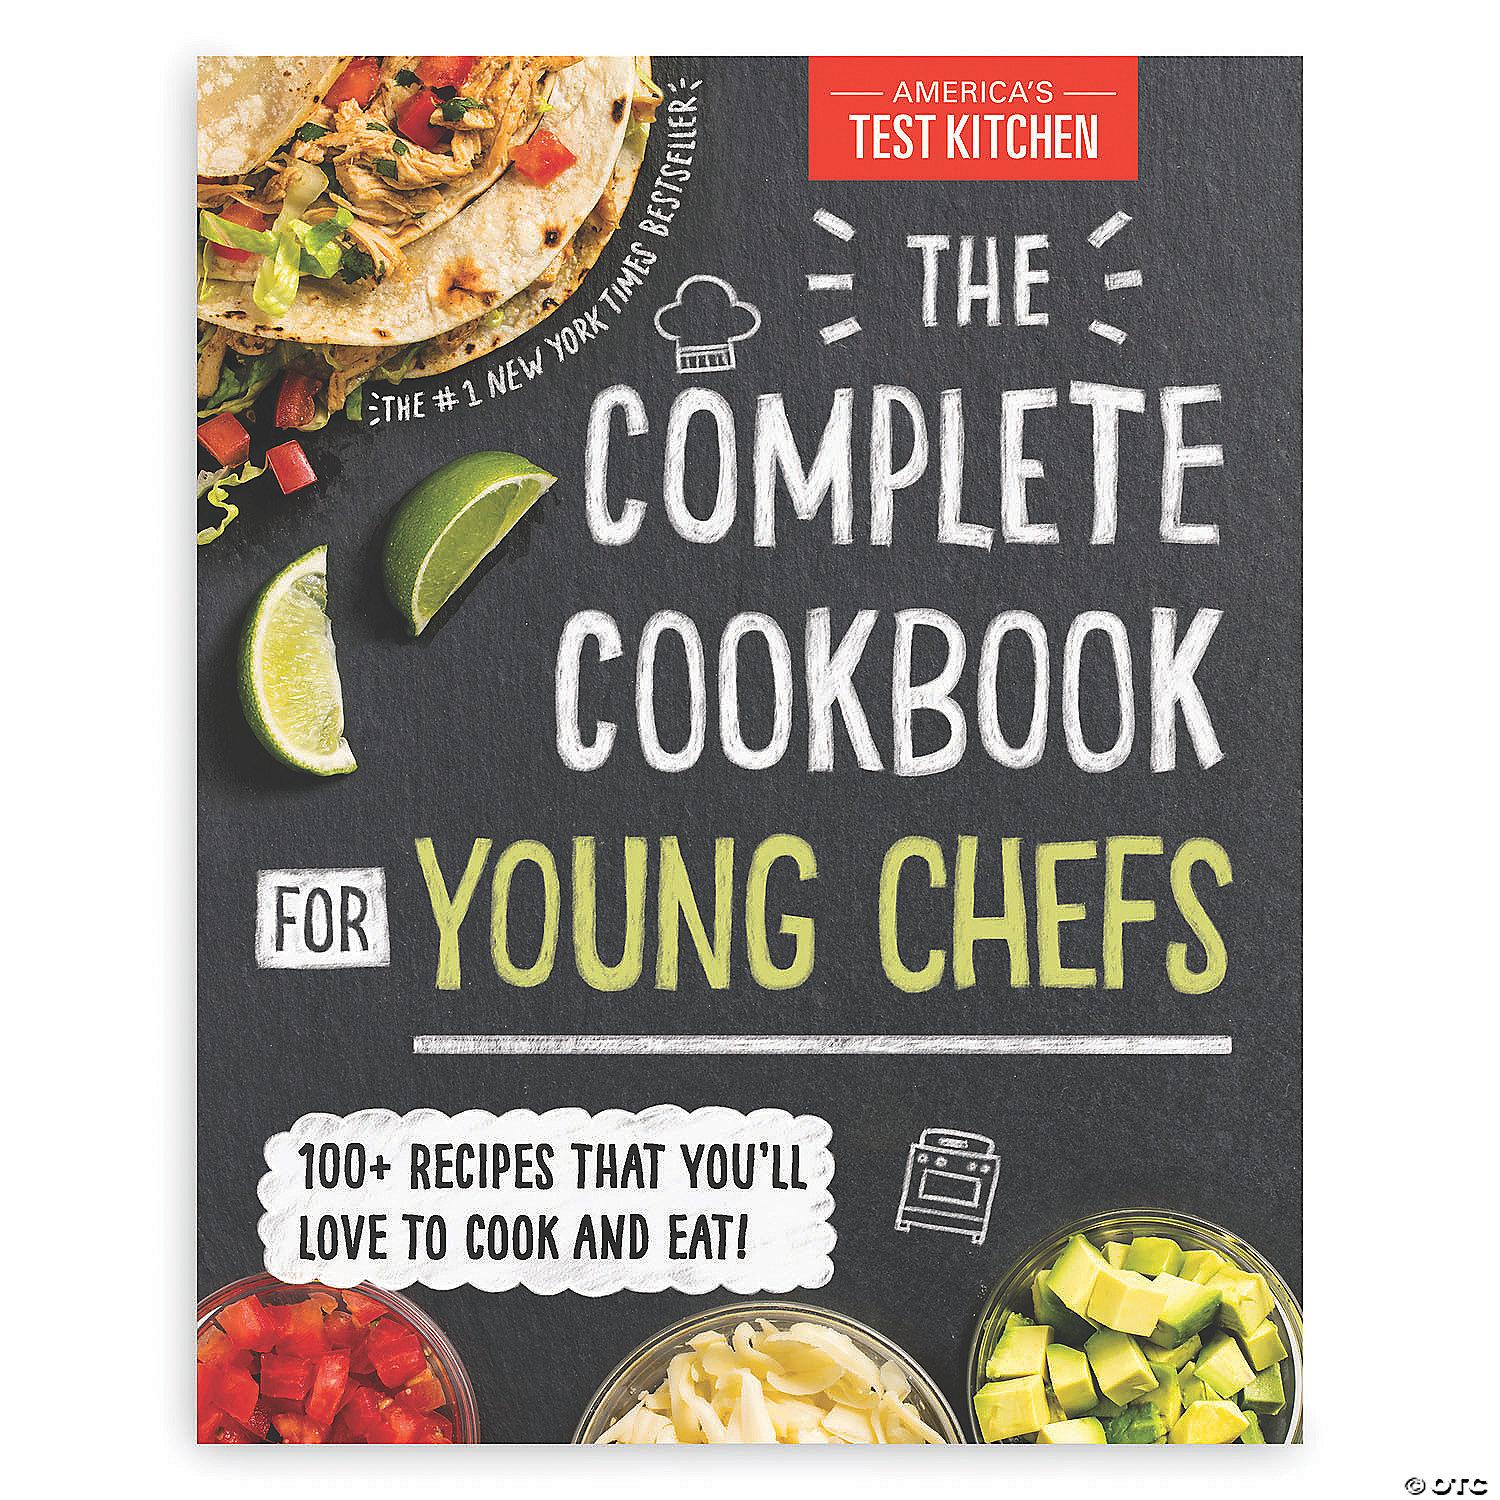 The Complete Cookbook for Young Chefs for $6.30